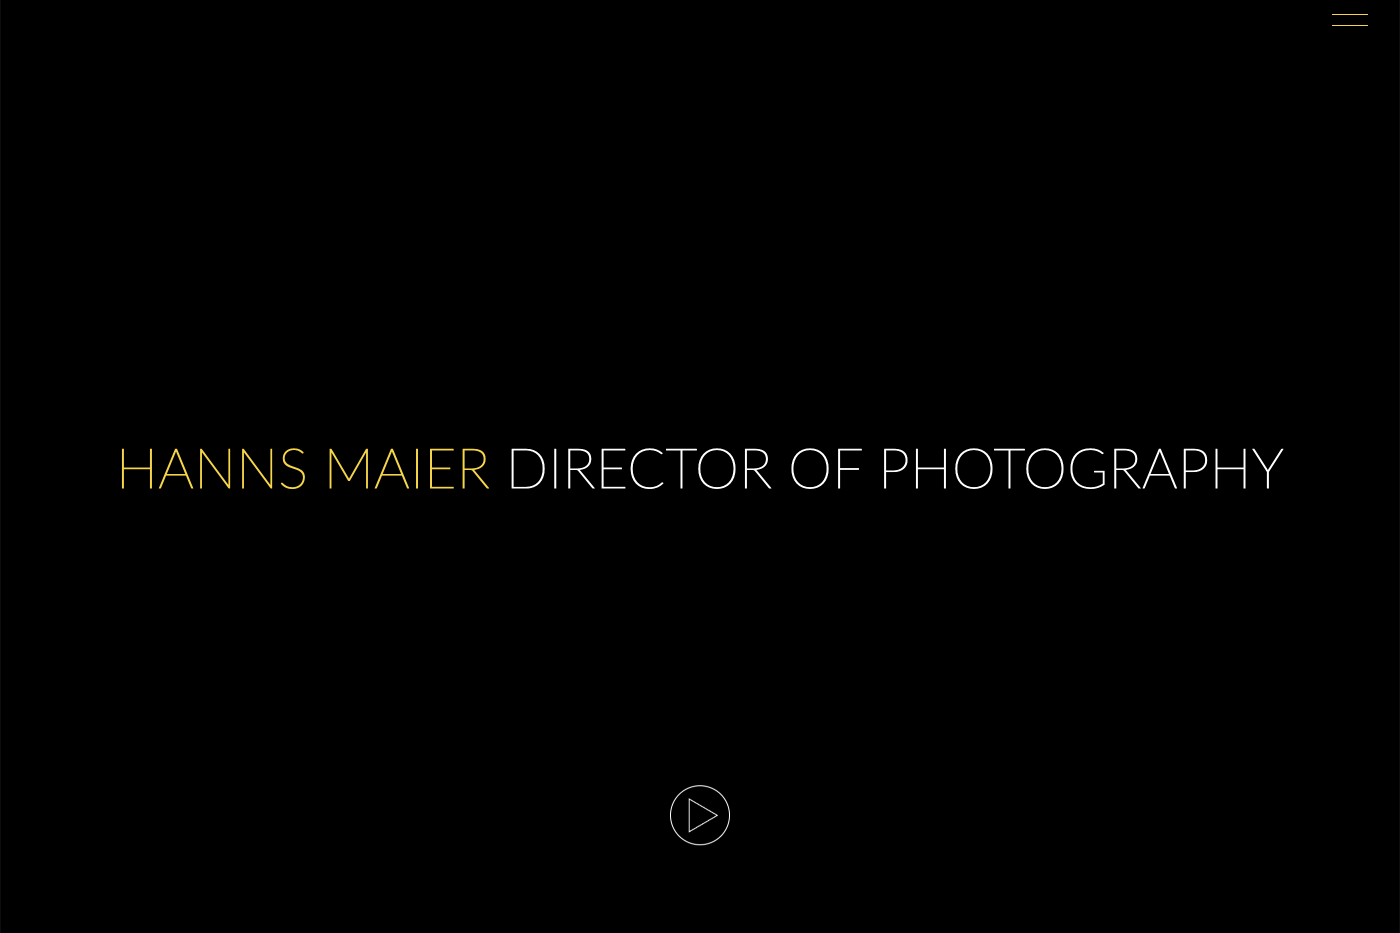 Hanns Maier – Director of Photography